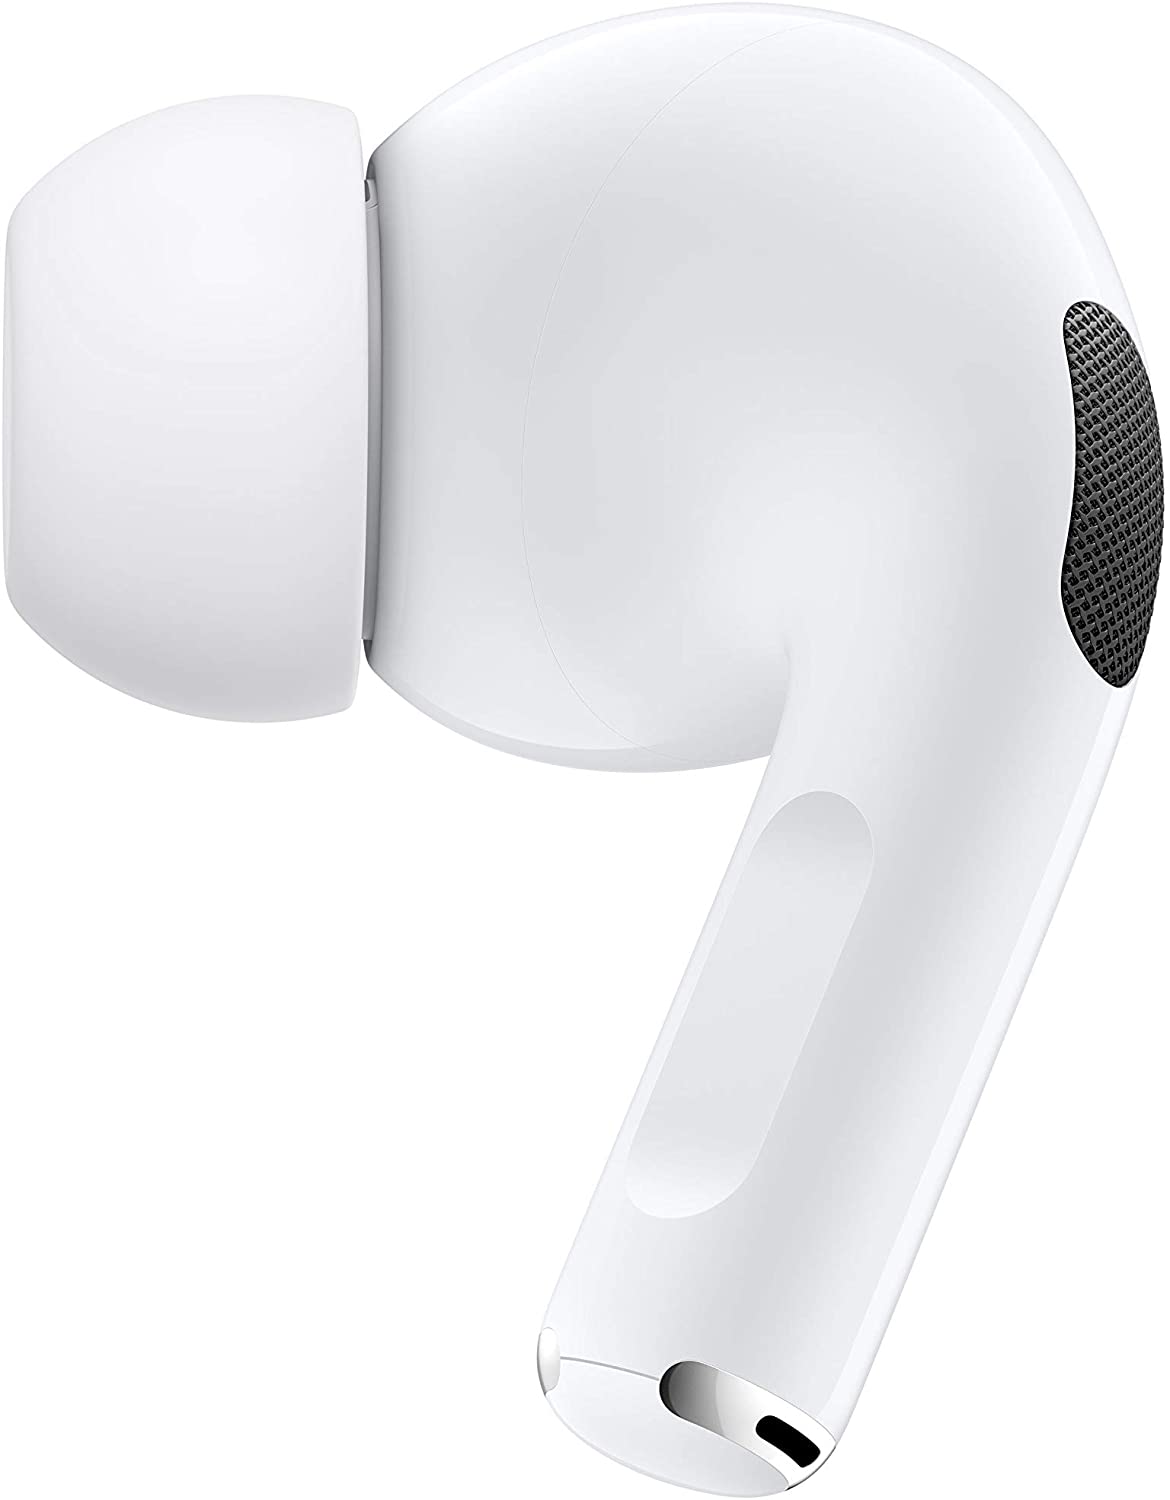 Apple AirPods Pro With Wireless Charging Case White MWP22AM-A